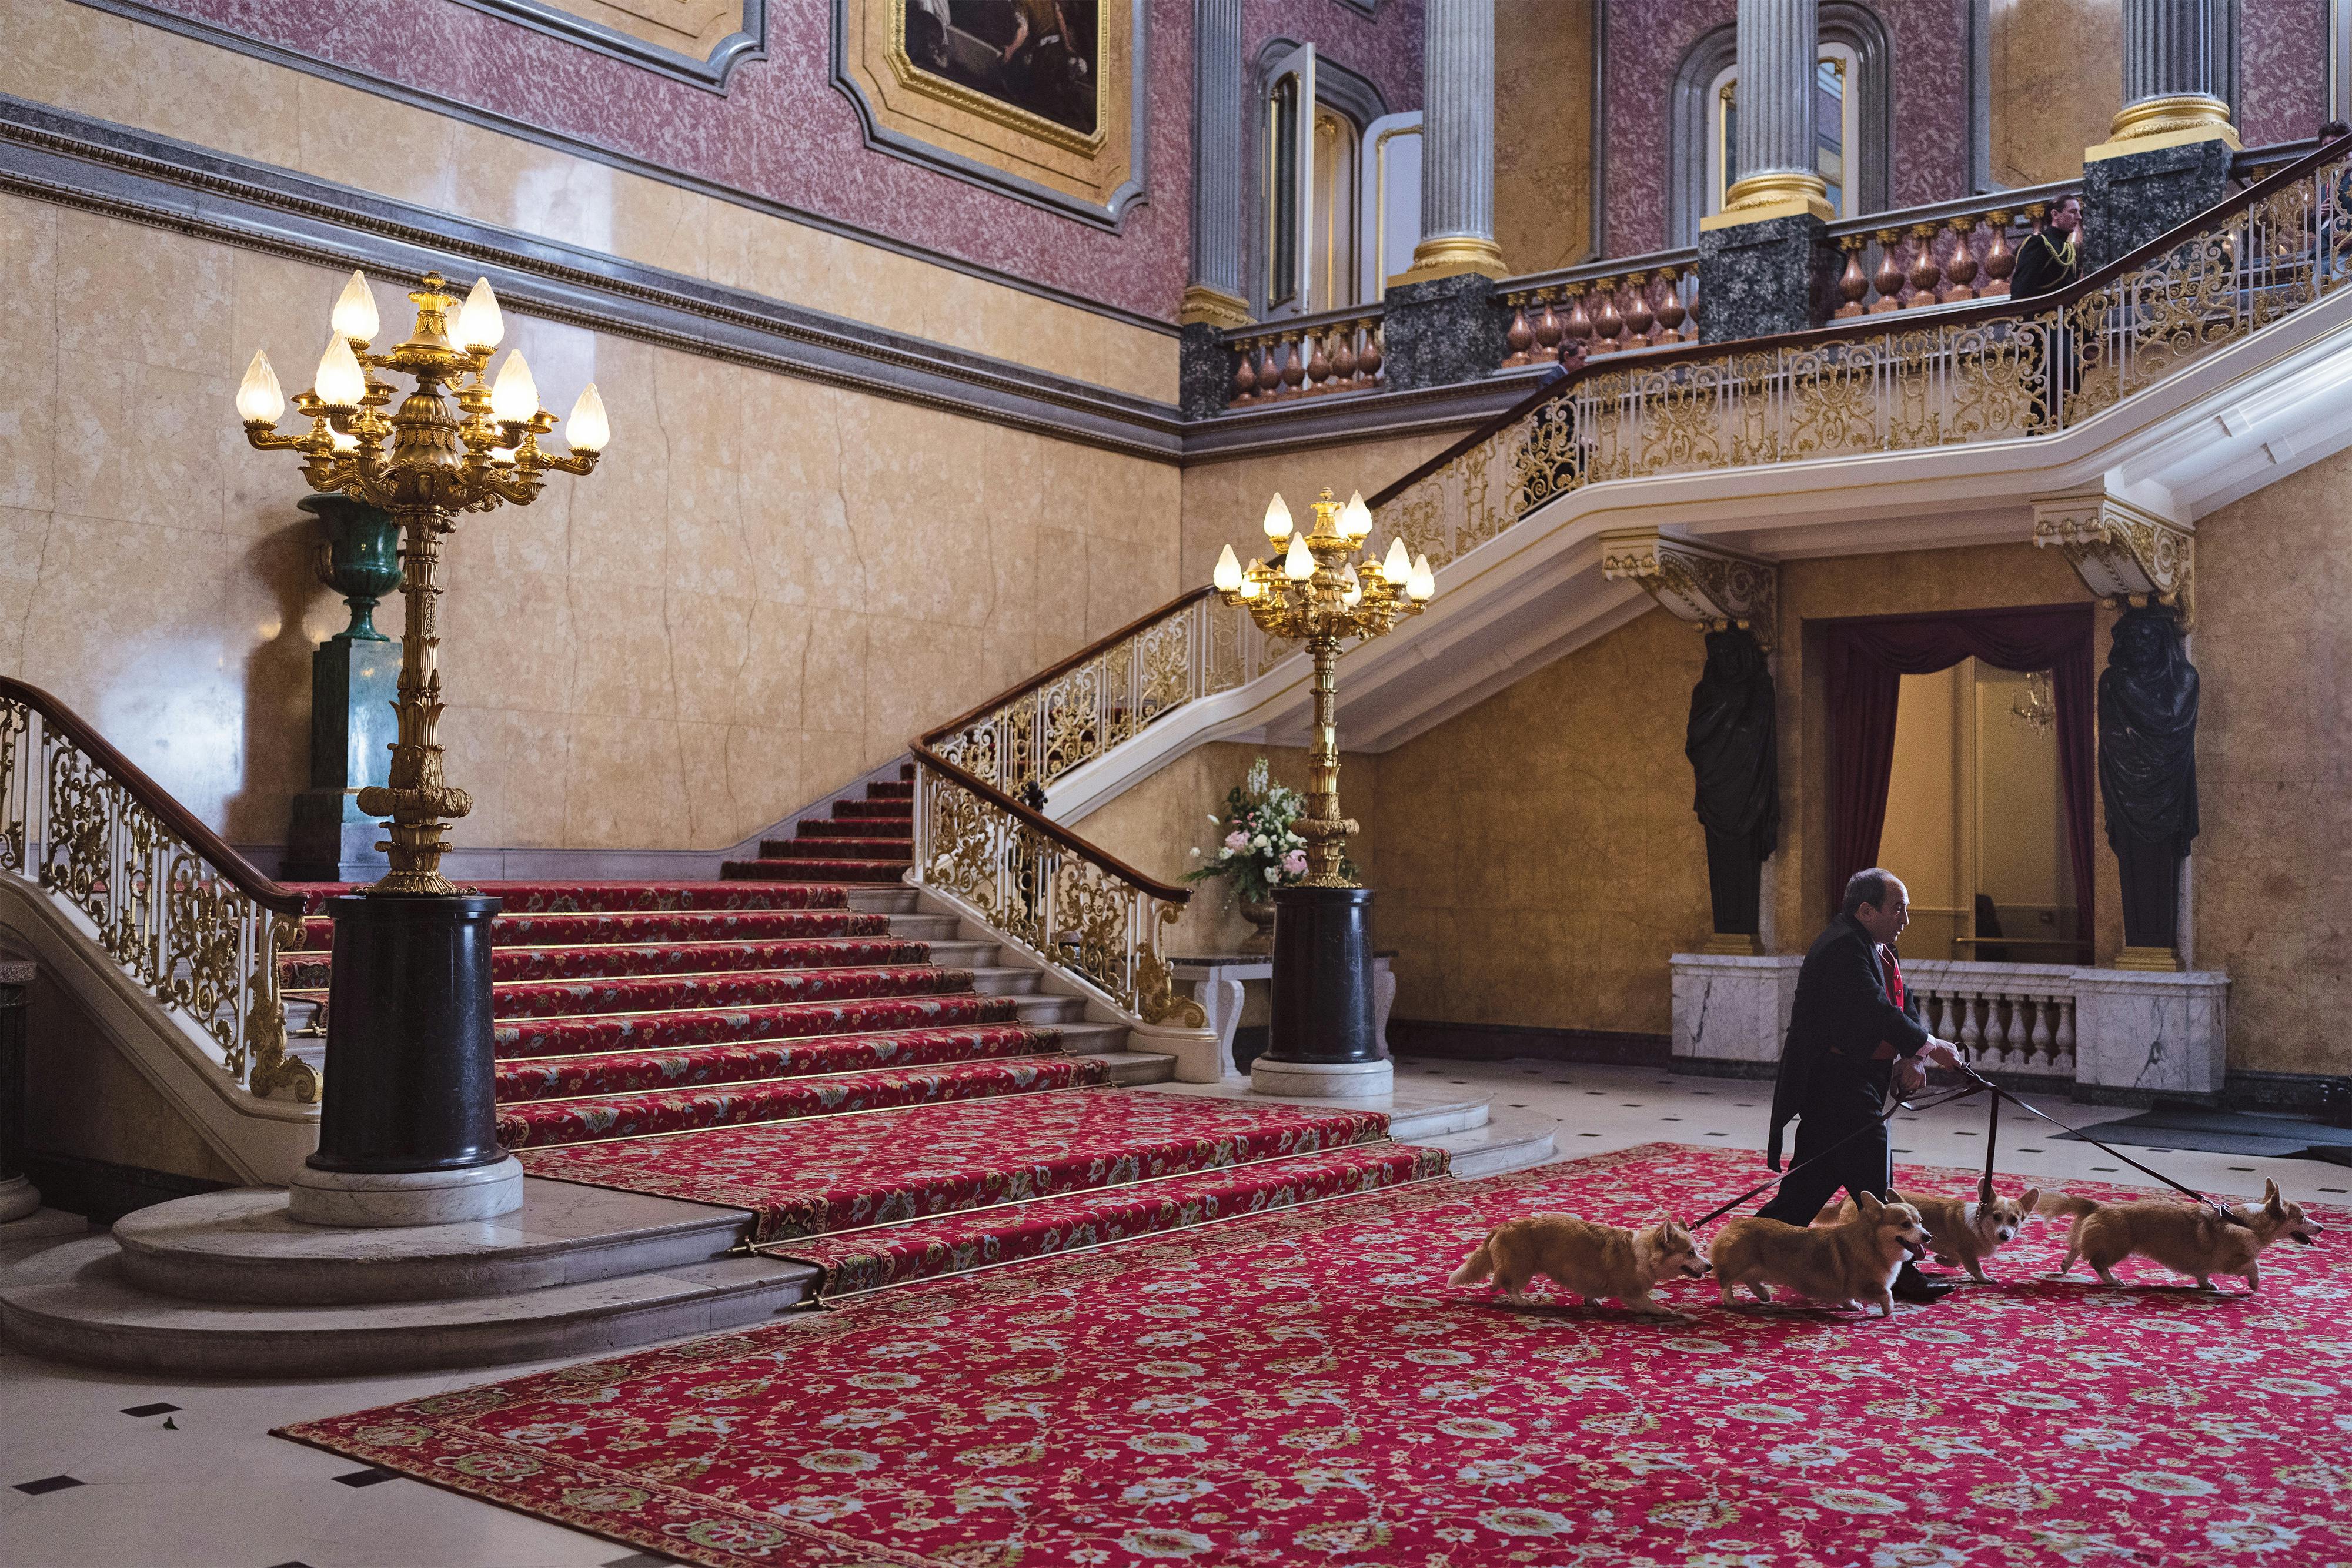 A shot from the interior of Buckingham Palace. A man walks four corgis on a red carpet.